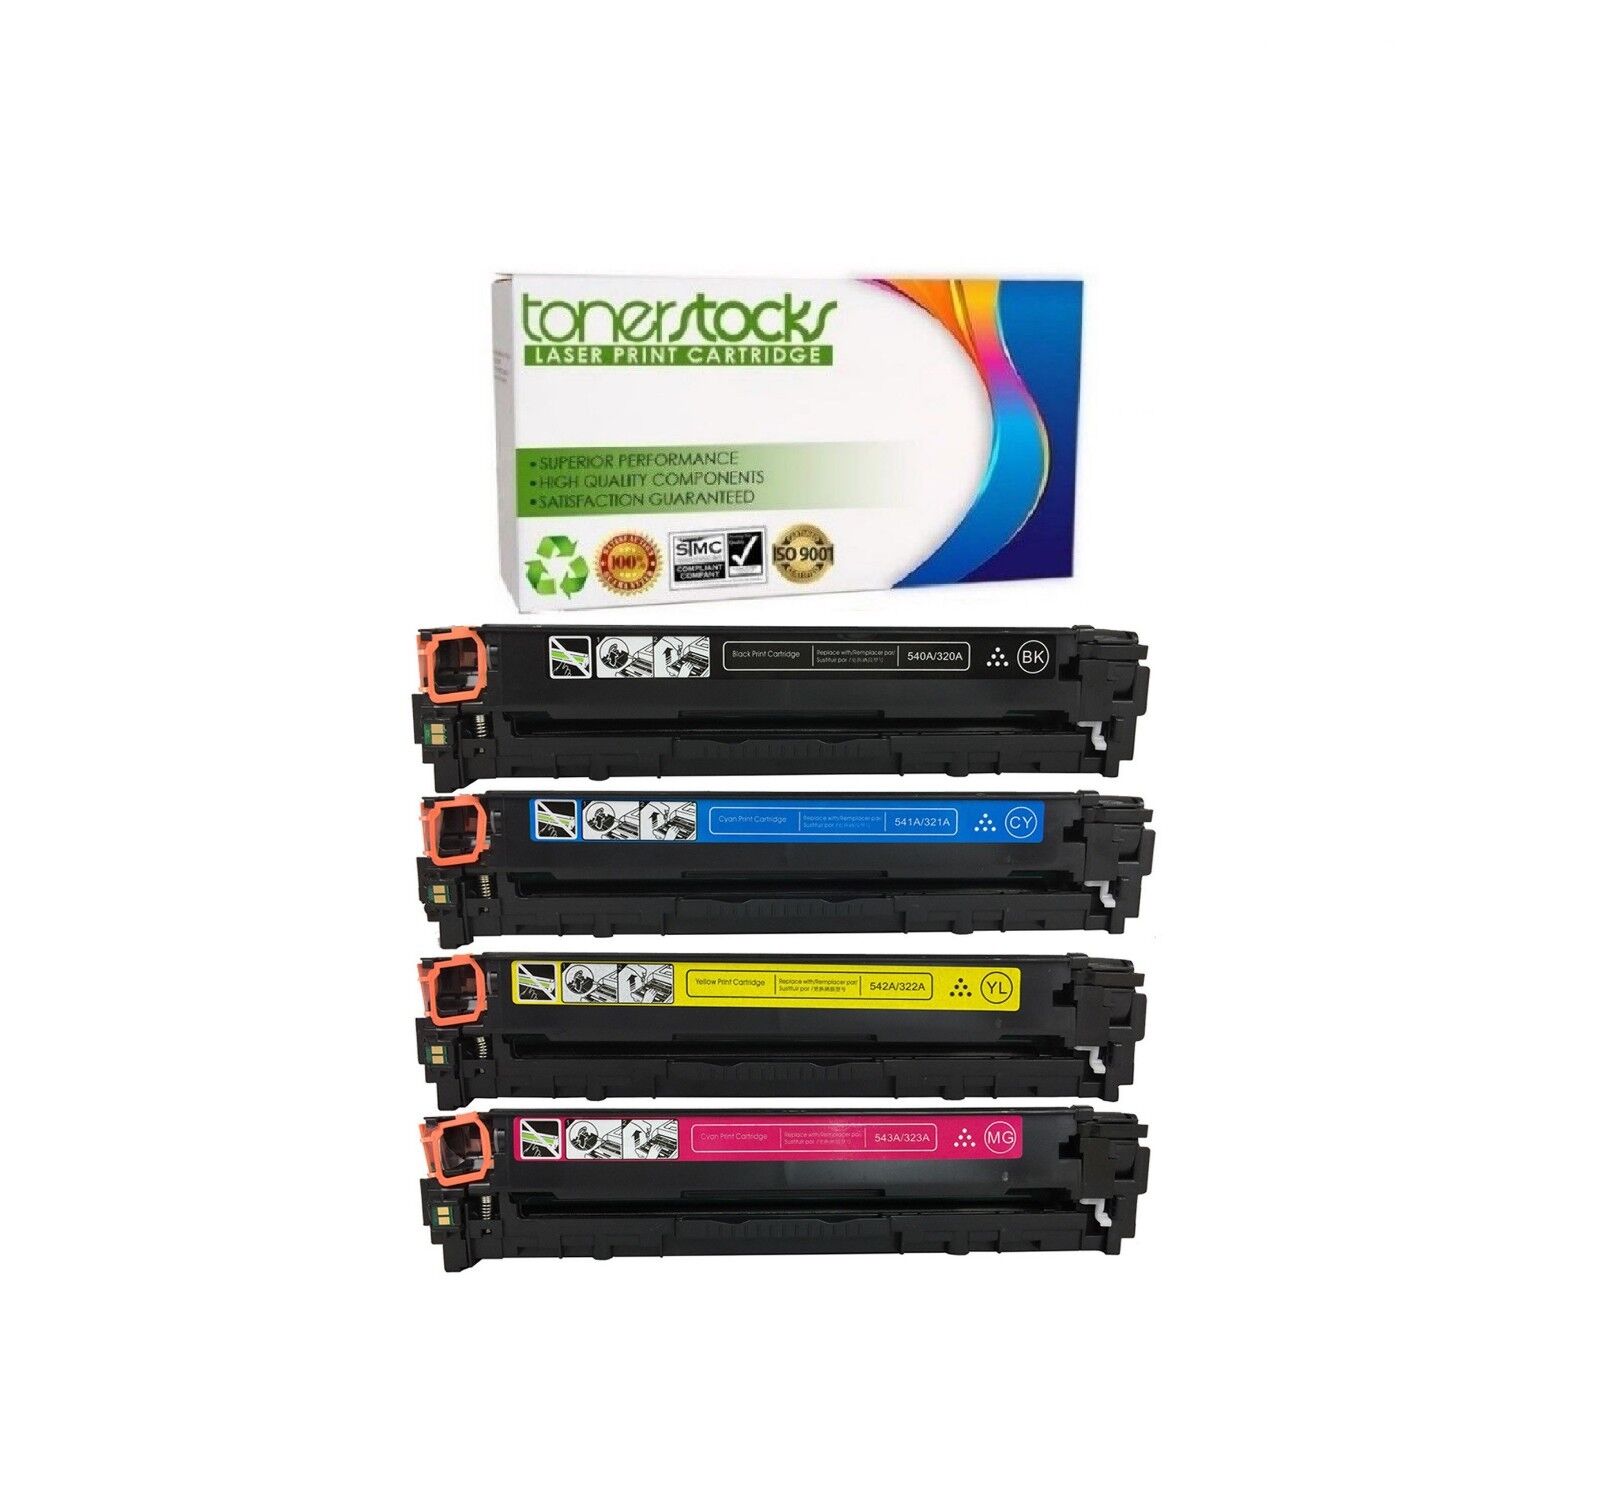 CF210X Toner for HP LaserJet Pro 200 Color MFP M276nw M251nw M251n | 4 PACK